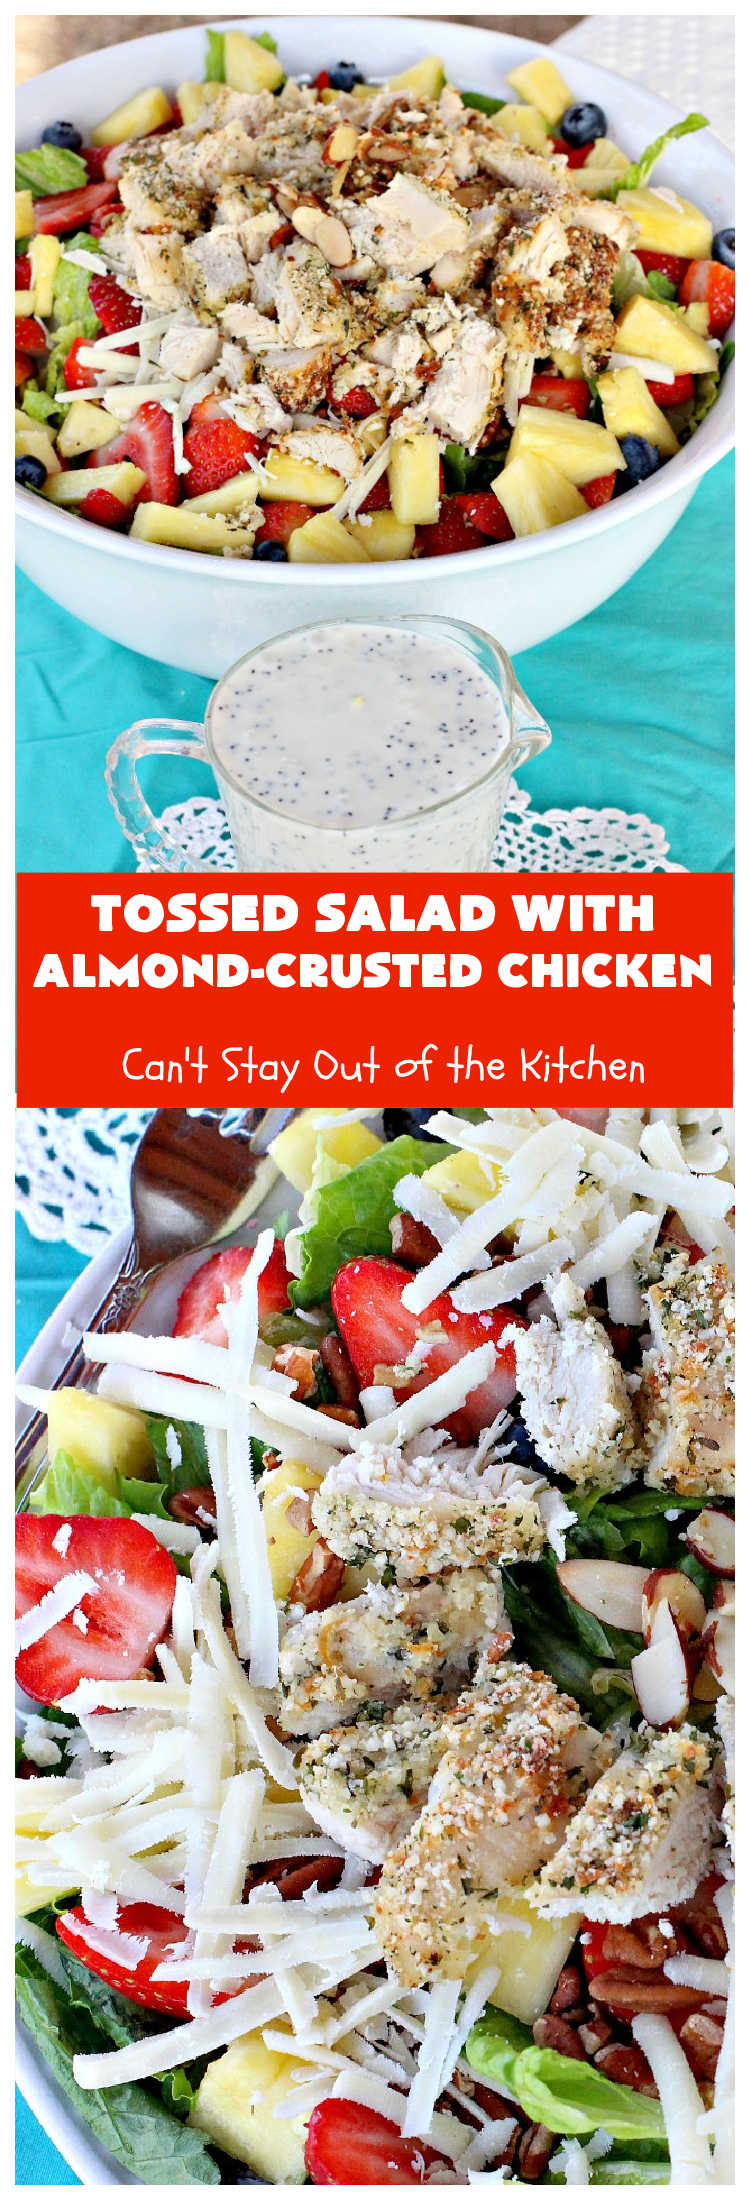 Tossed Salad with Almond-Crusted Chicken | Can't Stay Out of the Kitchen | this amazing #salad is fabulous for main dish meals or company dinners. It includes #pineapple #strawberries #blueberries #pecans & #RomanoCheese. It's topped with #AlmondCrustedChicken so the recipe is #GlutenFree #healthy & #CleanEating. #chicken #TossedSaladWithAlmondCrustedChicken